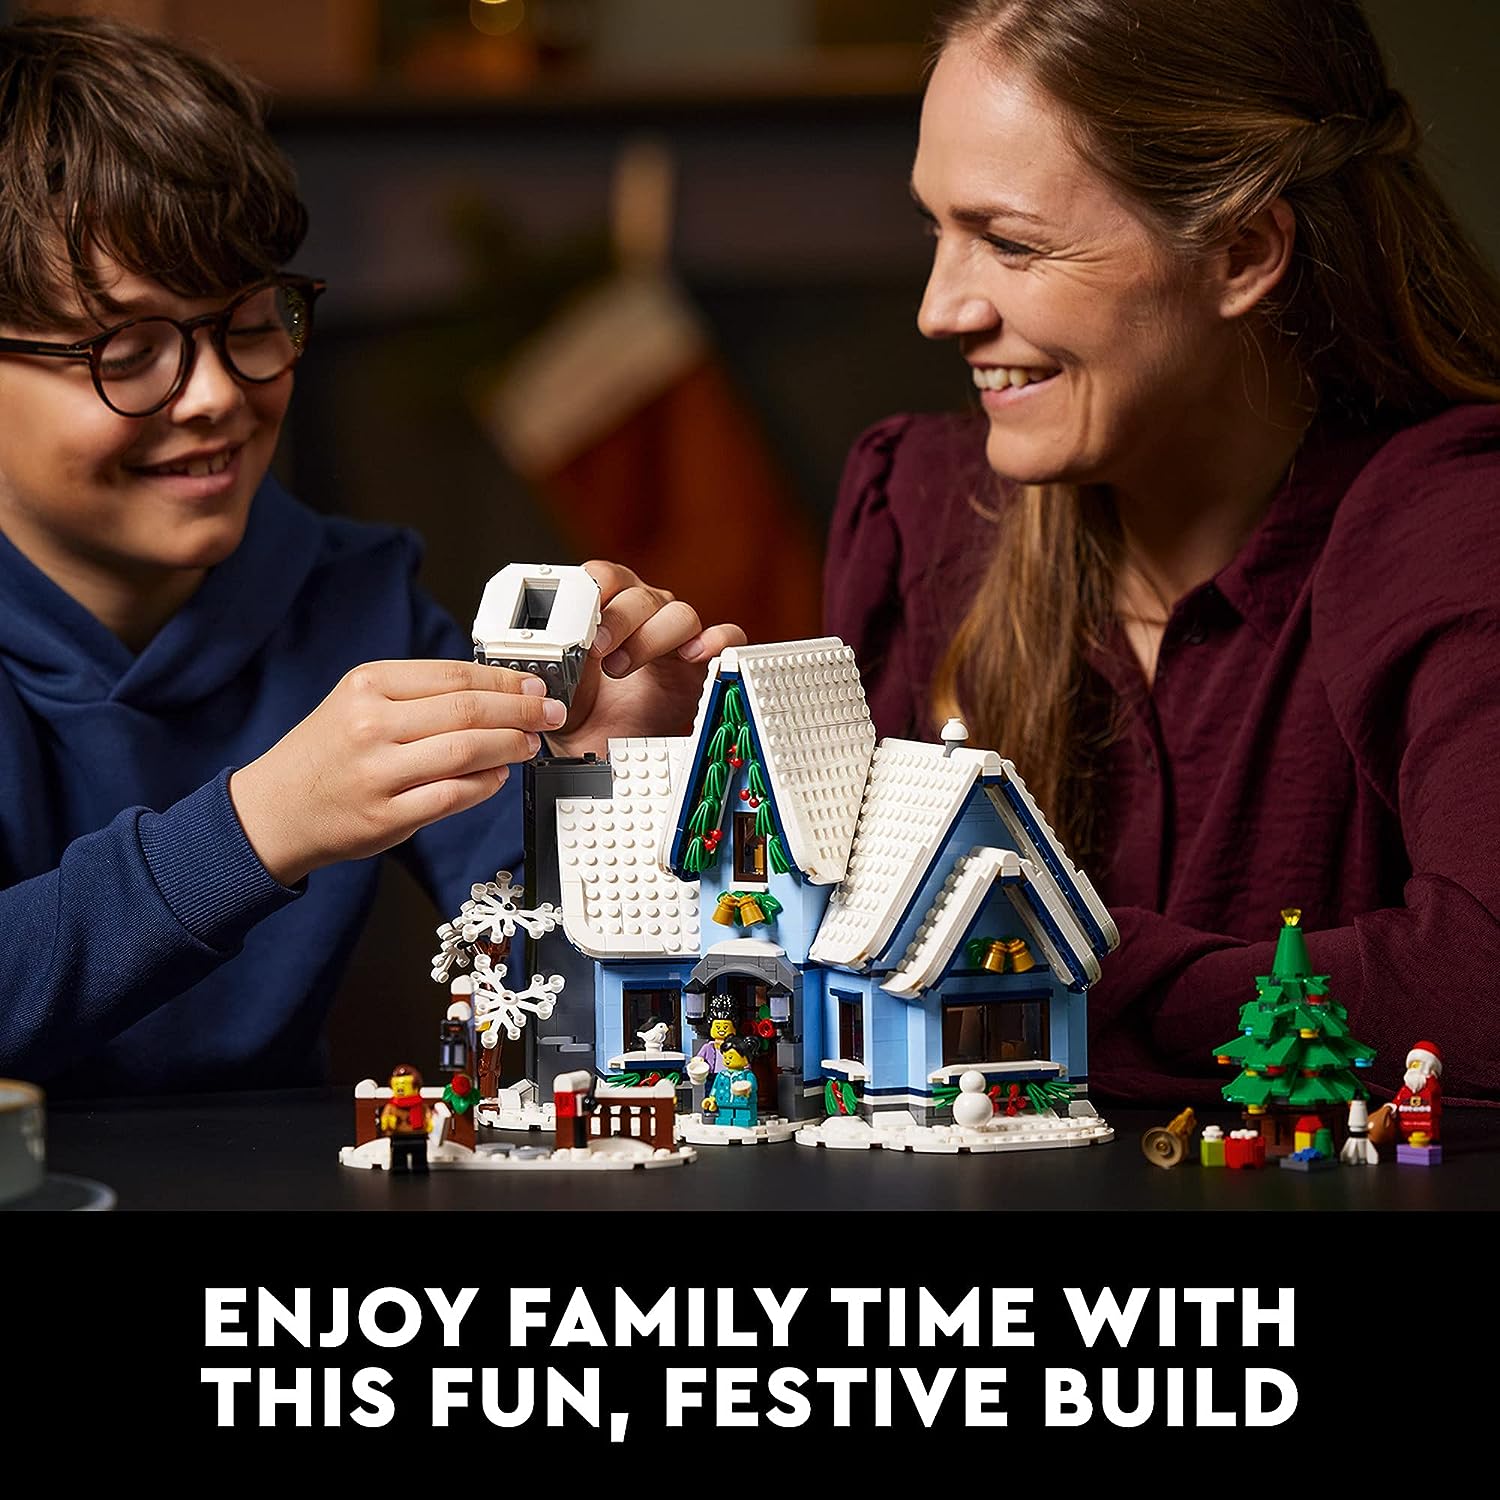 LEGO Icons Santa’s Visit 10293 Christmas House Model Building Set for Adults and Families, Festive Home Décor with Xmas Tree, Gift Idea